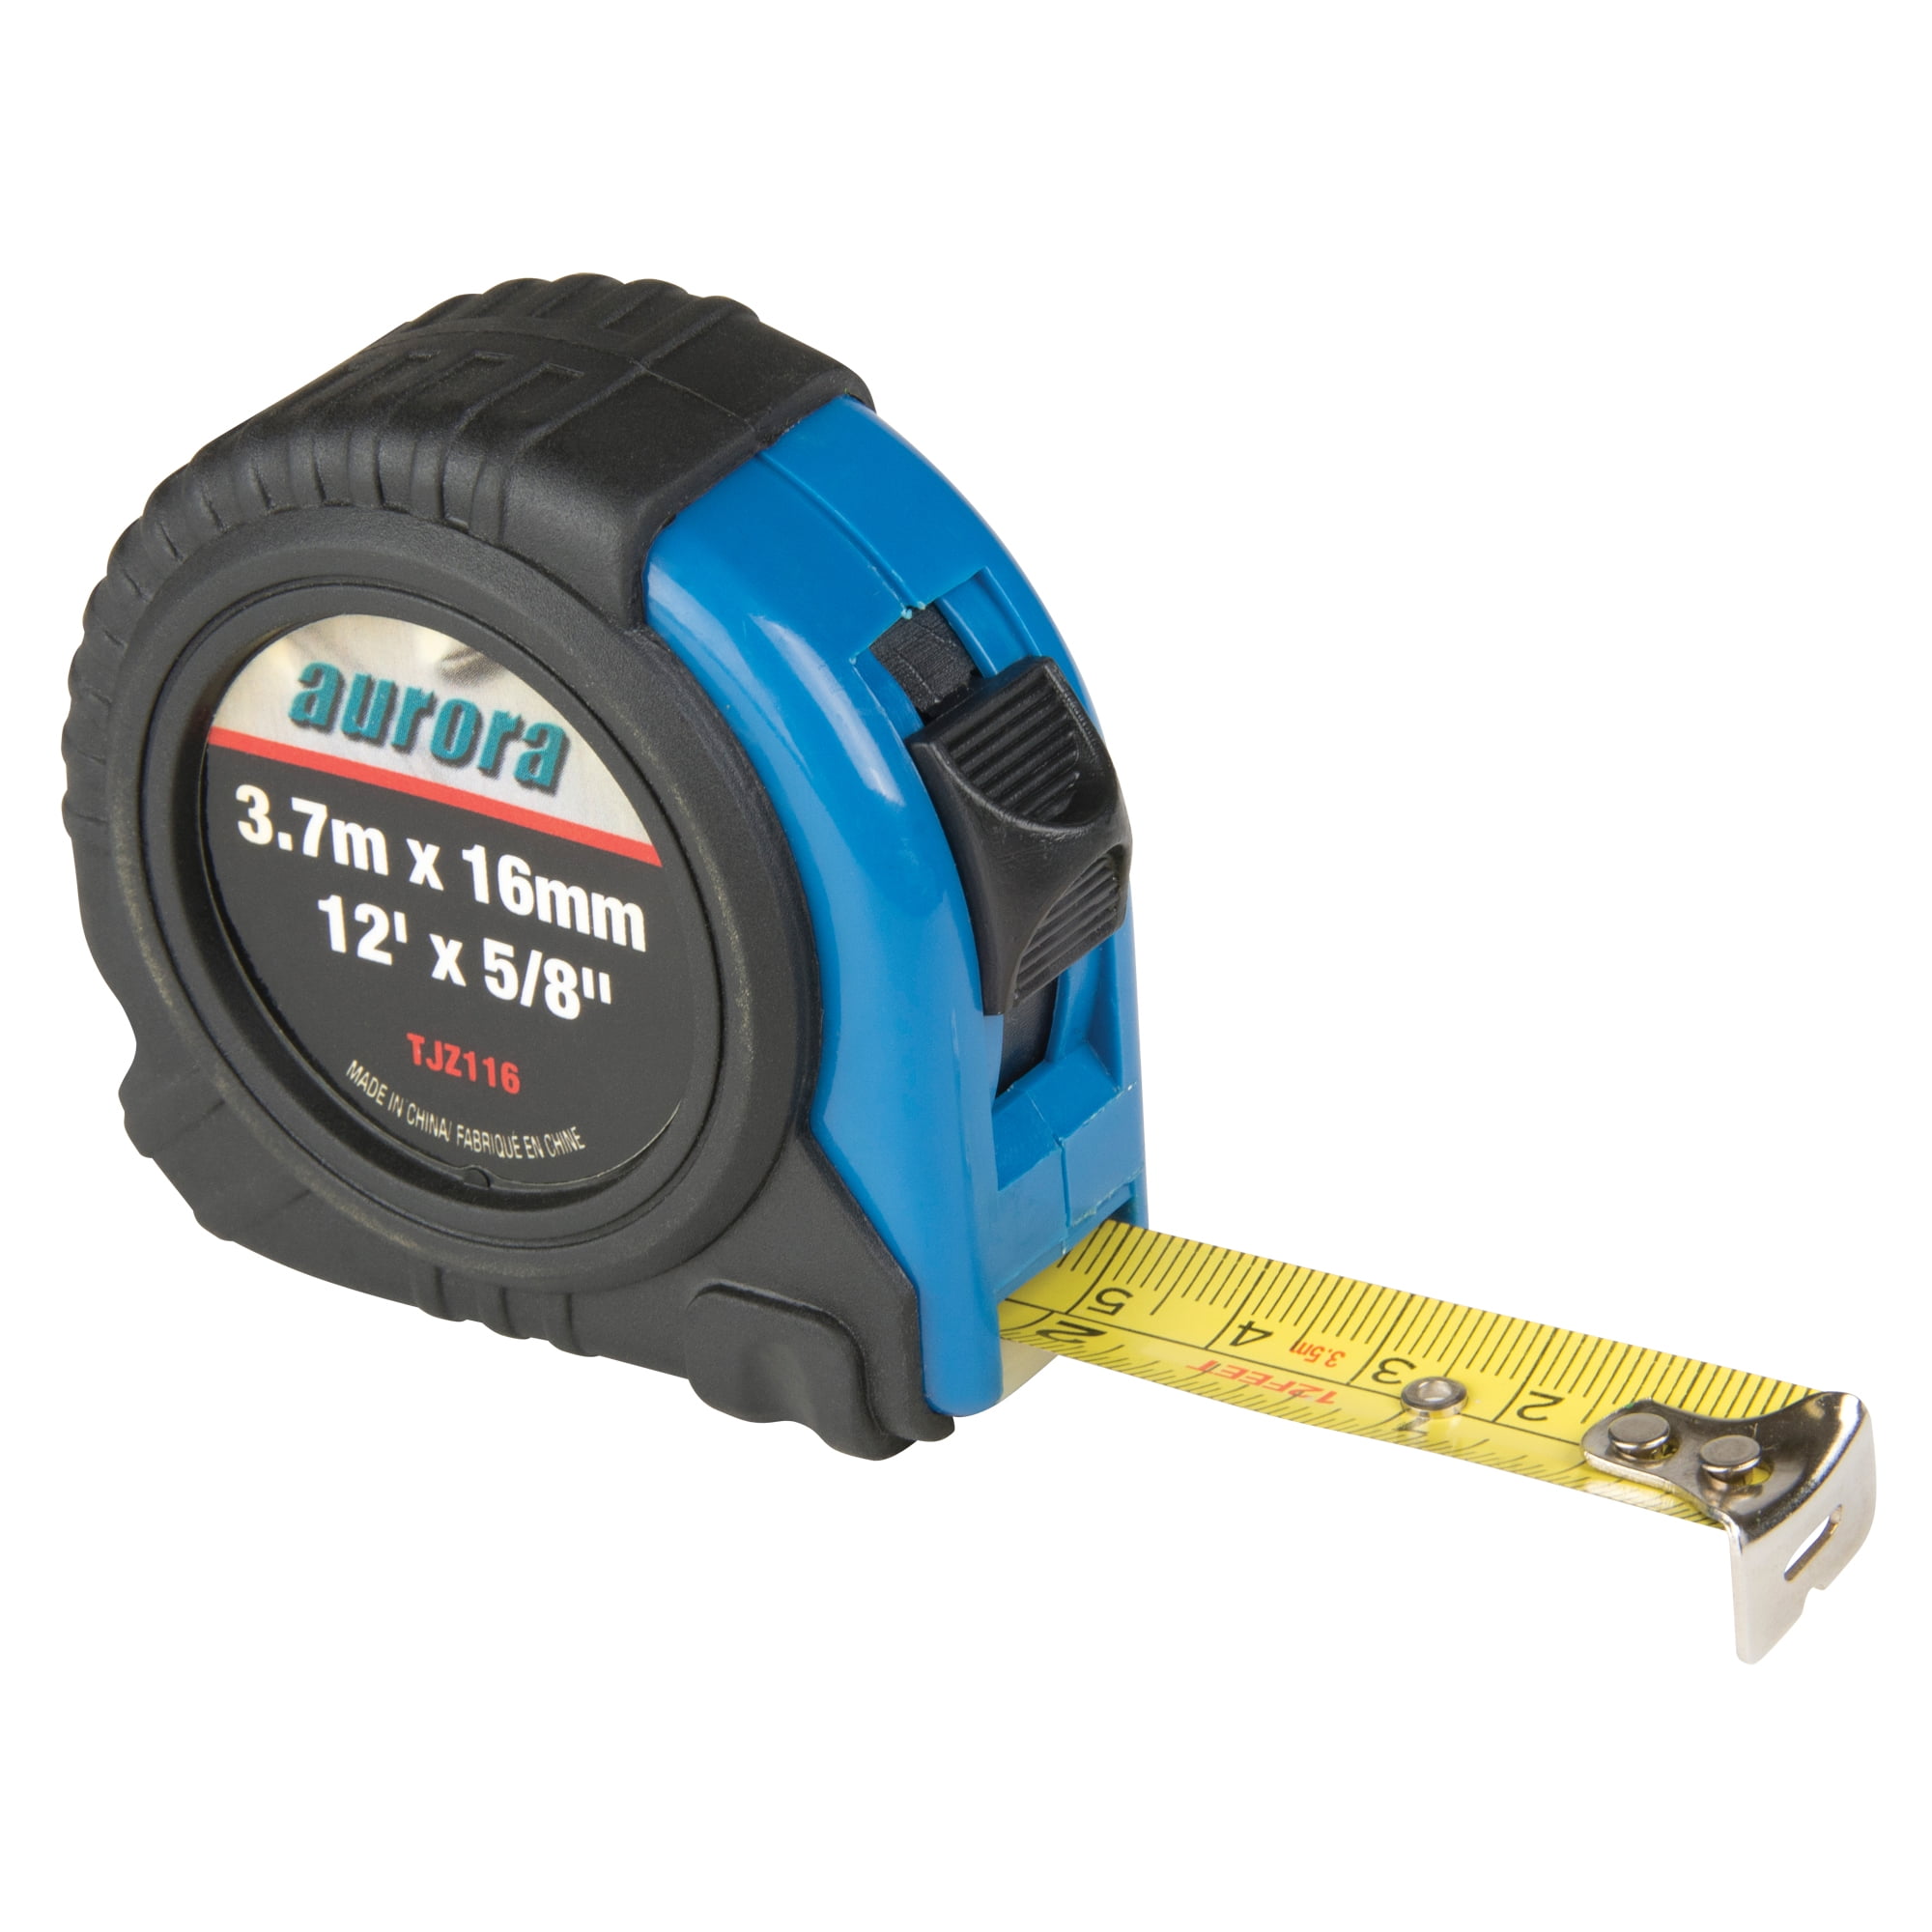 in//cm Graduations 12-Feet by 5//8-Inch Aurora Tools Measuring Tape